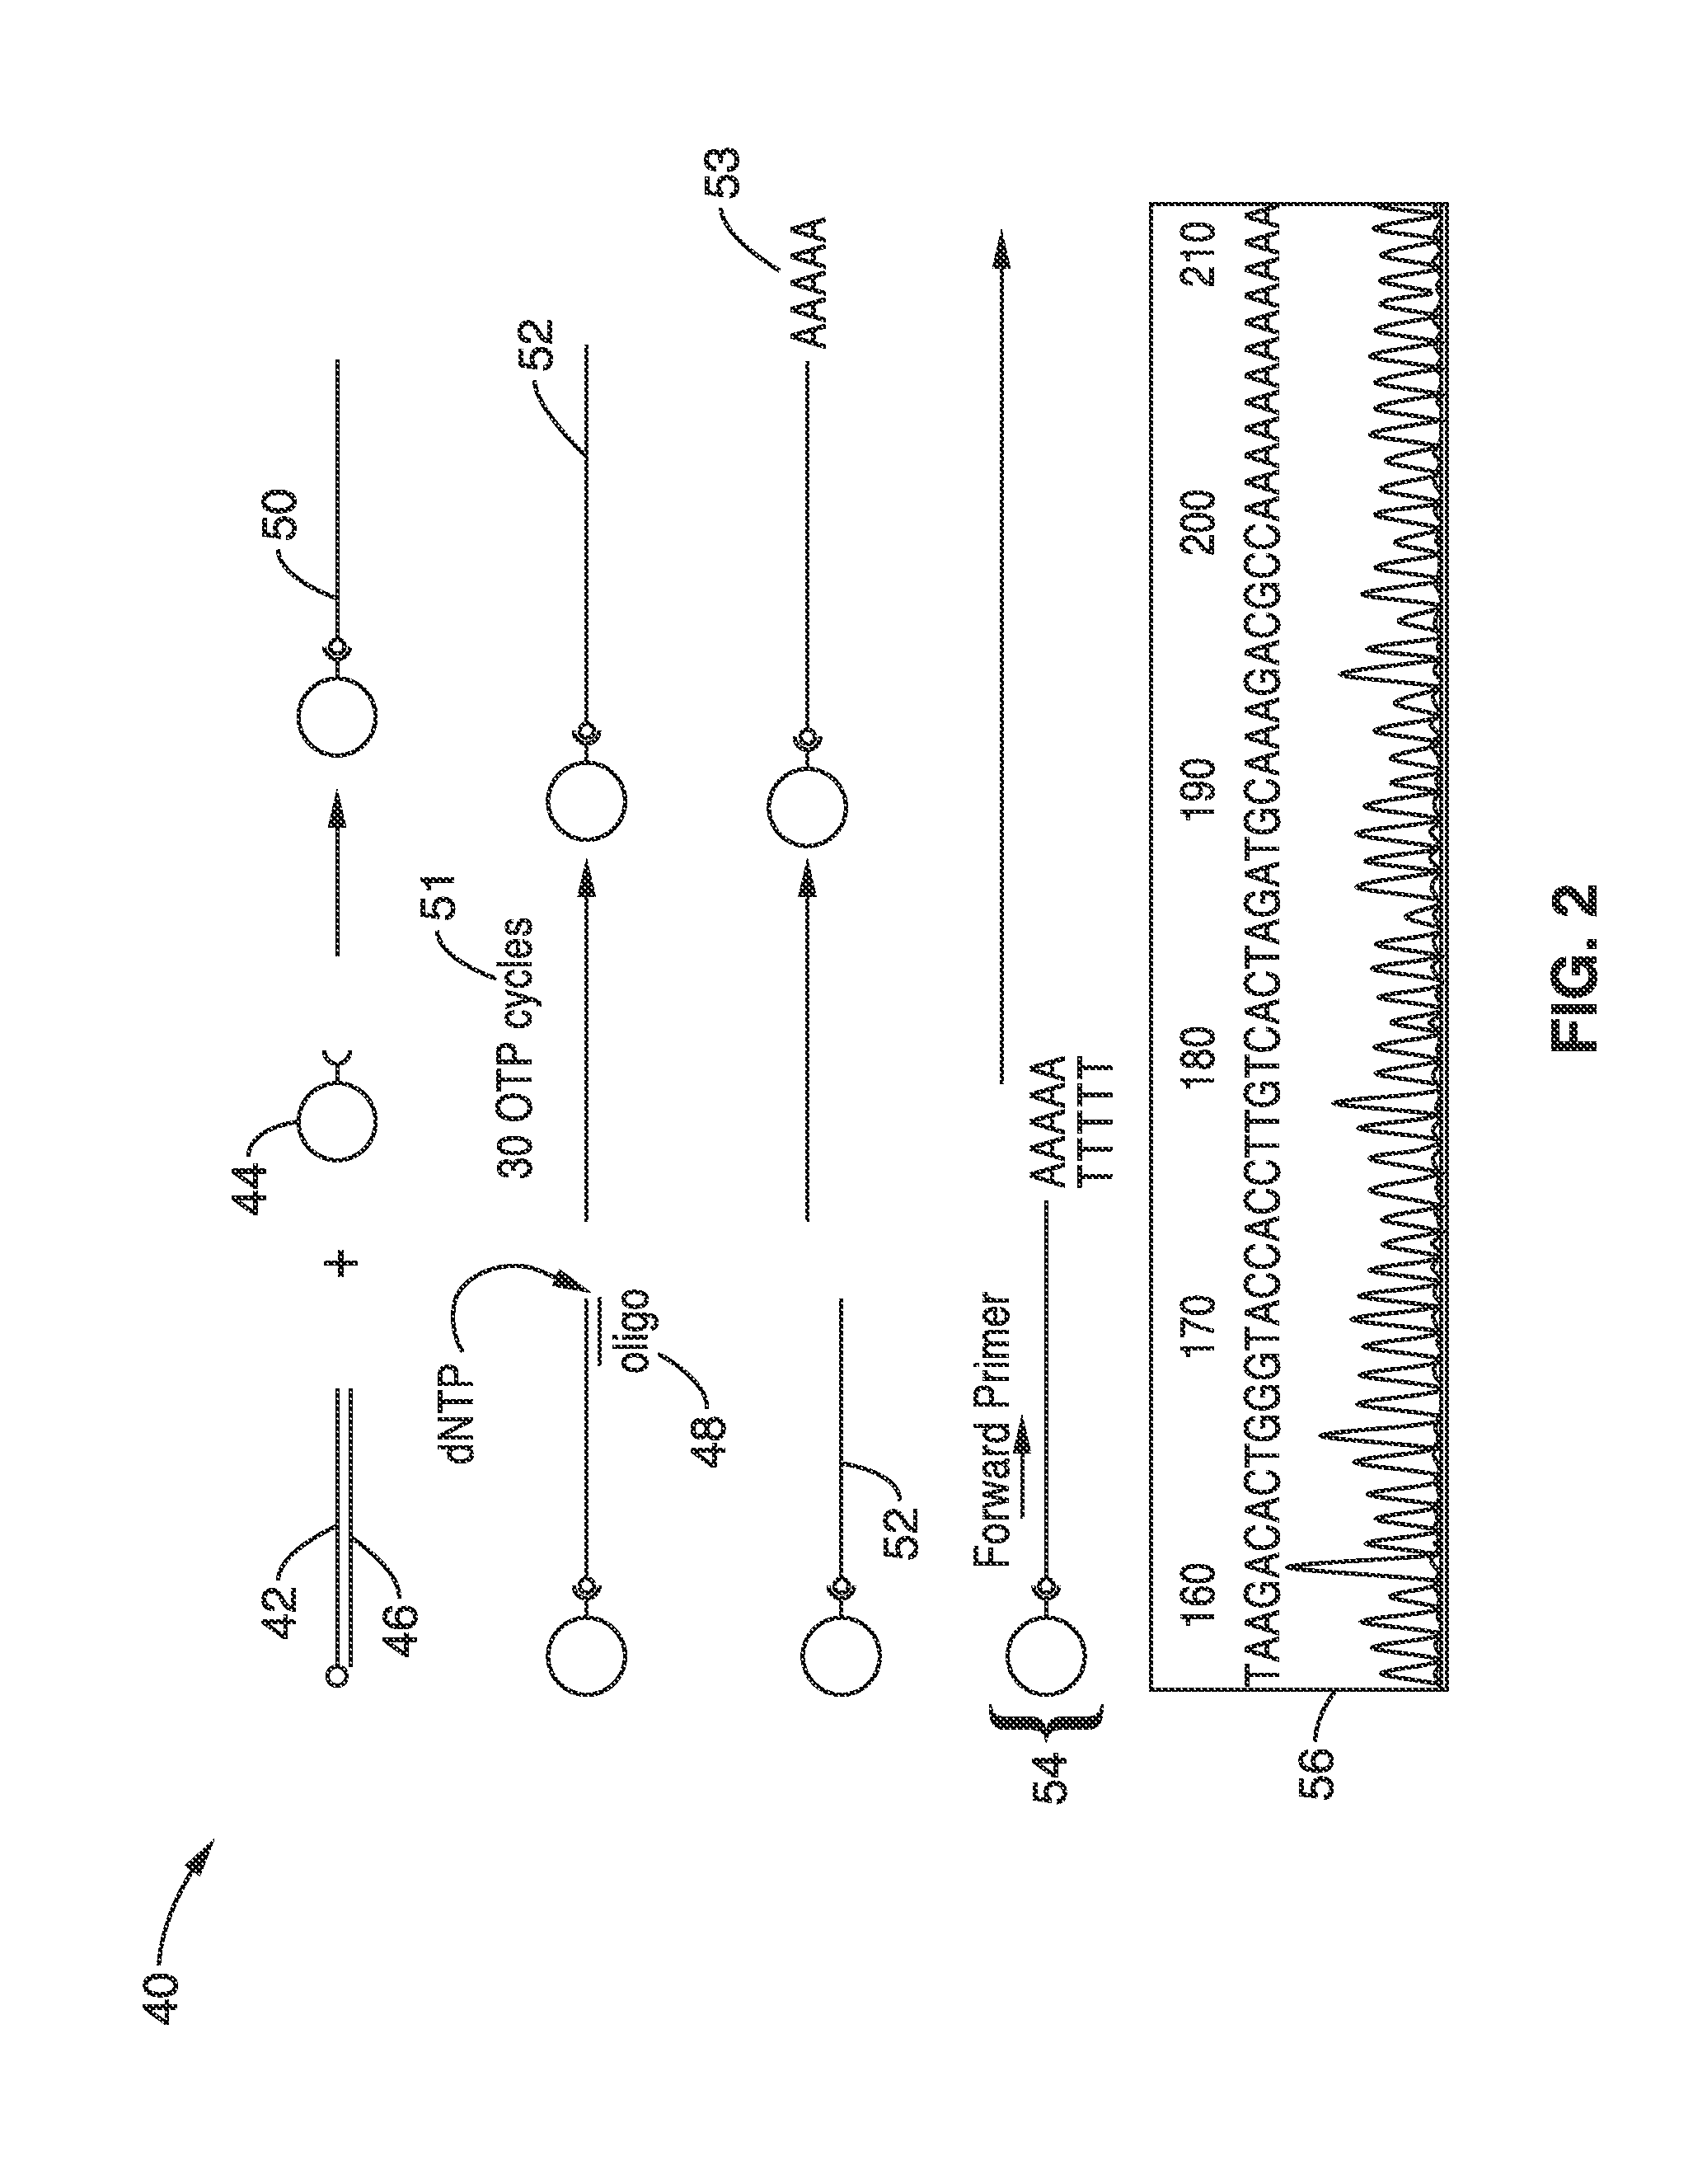 Methods and apparatus for nucleic acid synthesis using oligo-templated polymerization